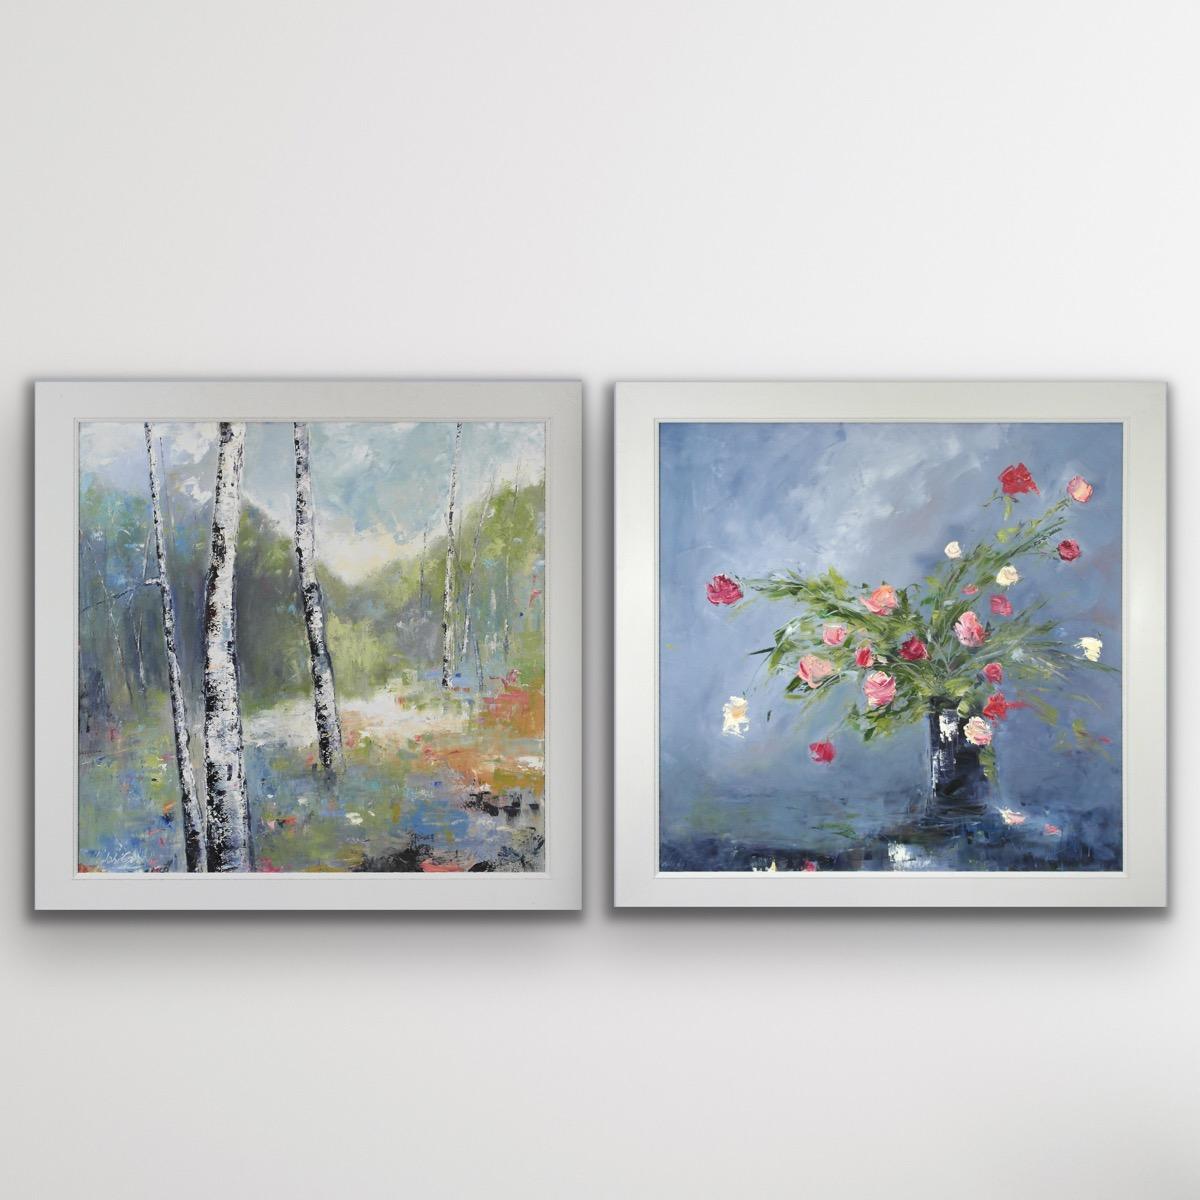 Libbi Gooch Landscape Painting - Black Jar and Roses and Woodland Opening Diptych